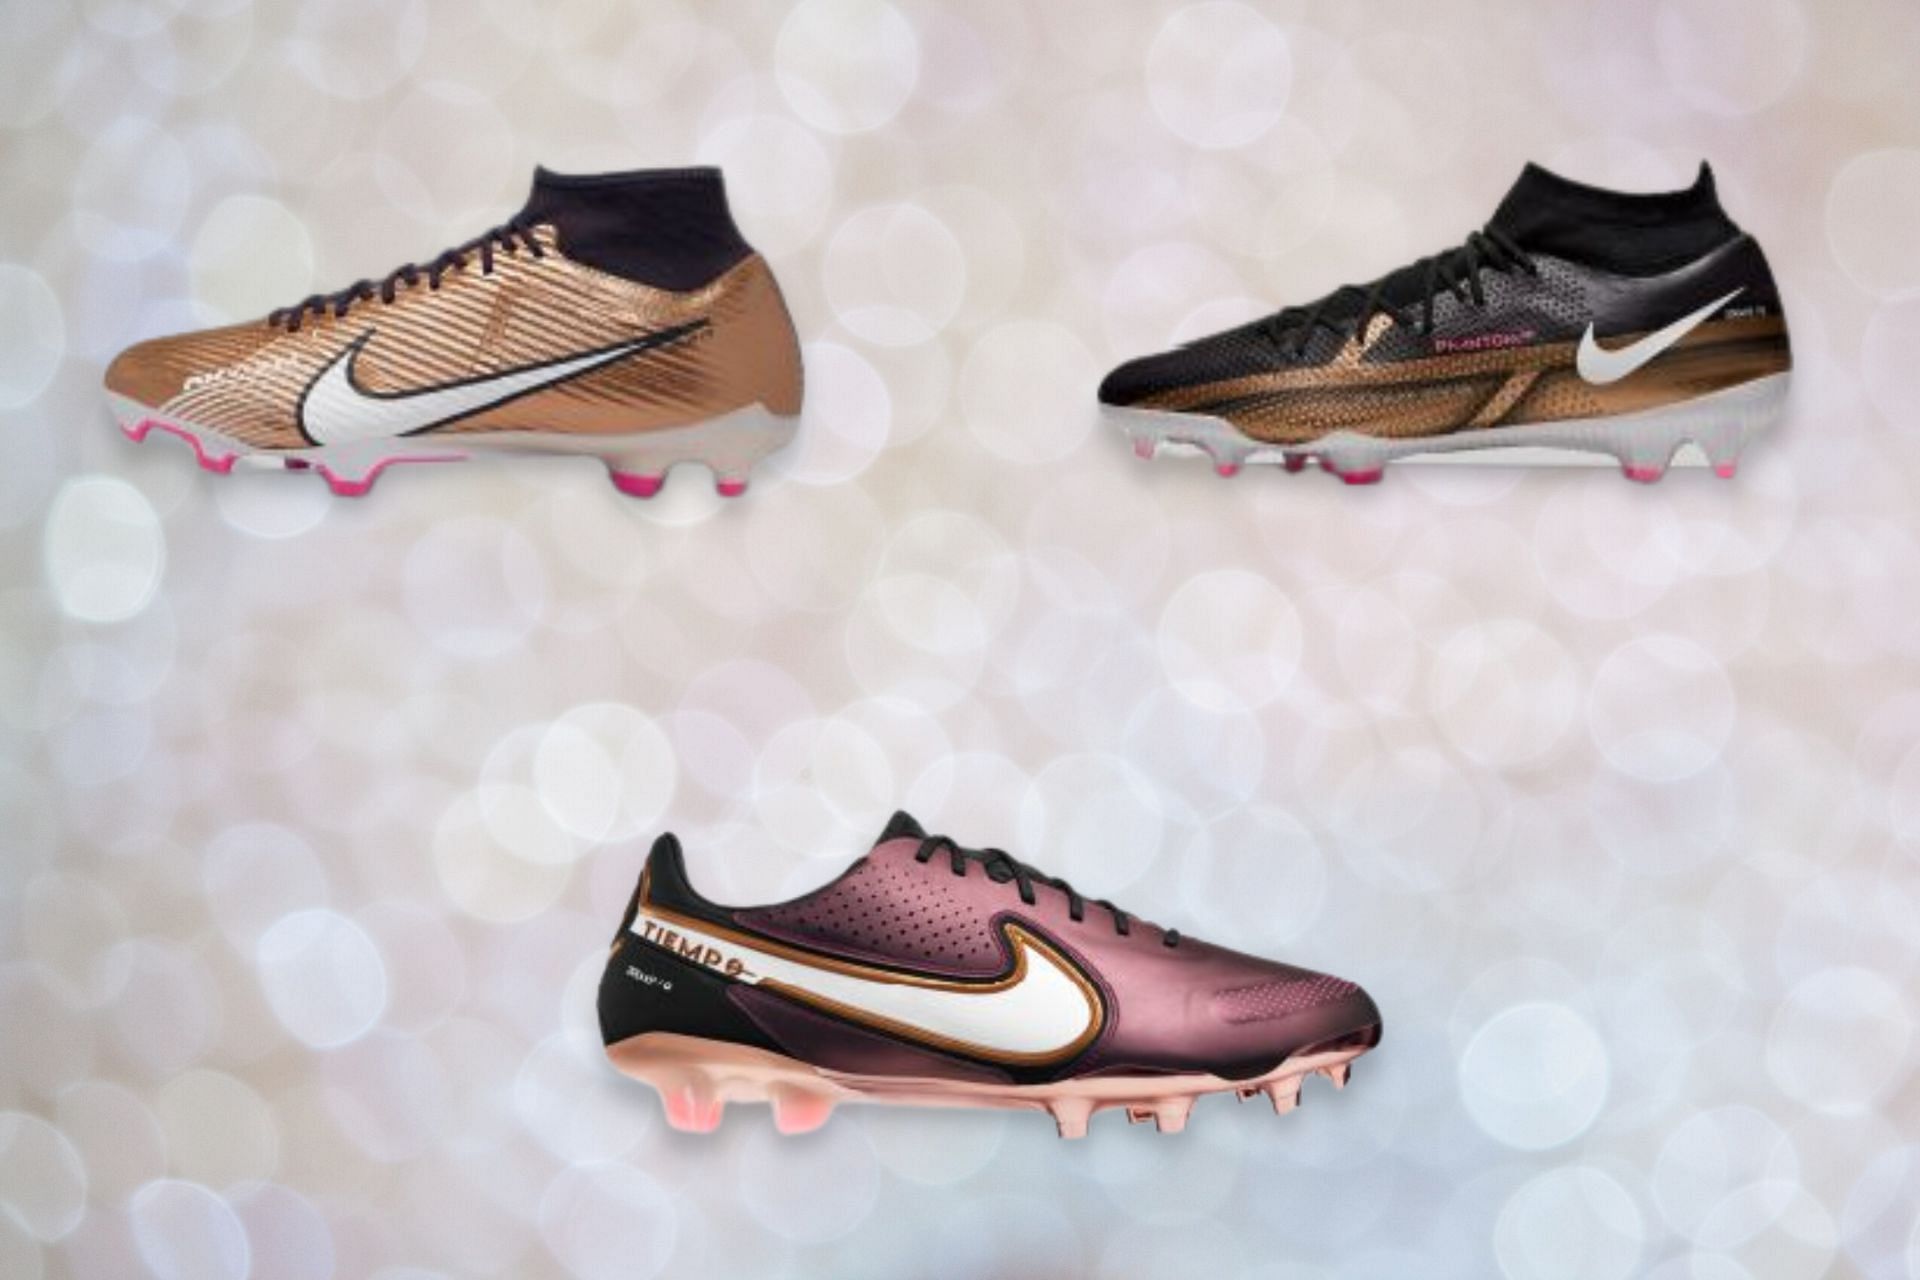 Nike Reveal The 'Generation Pack' For The 2022 World Cup - SoccerBible